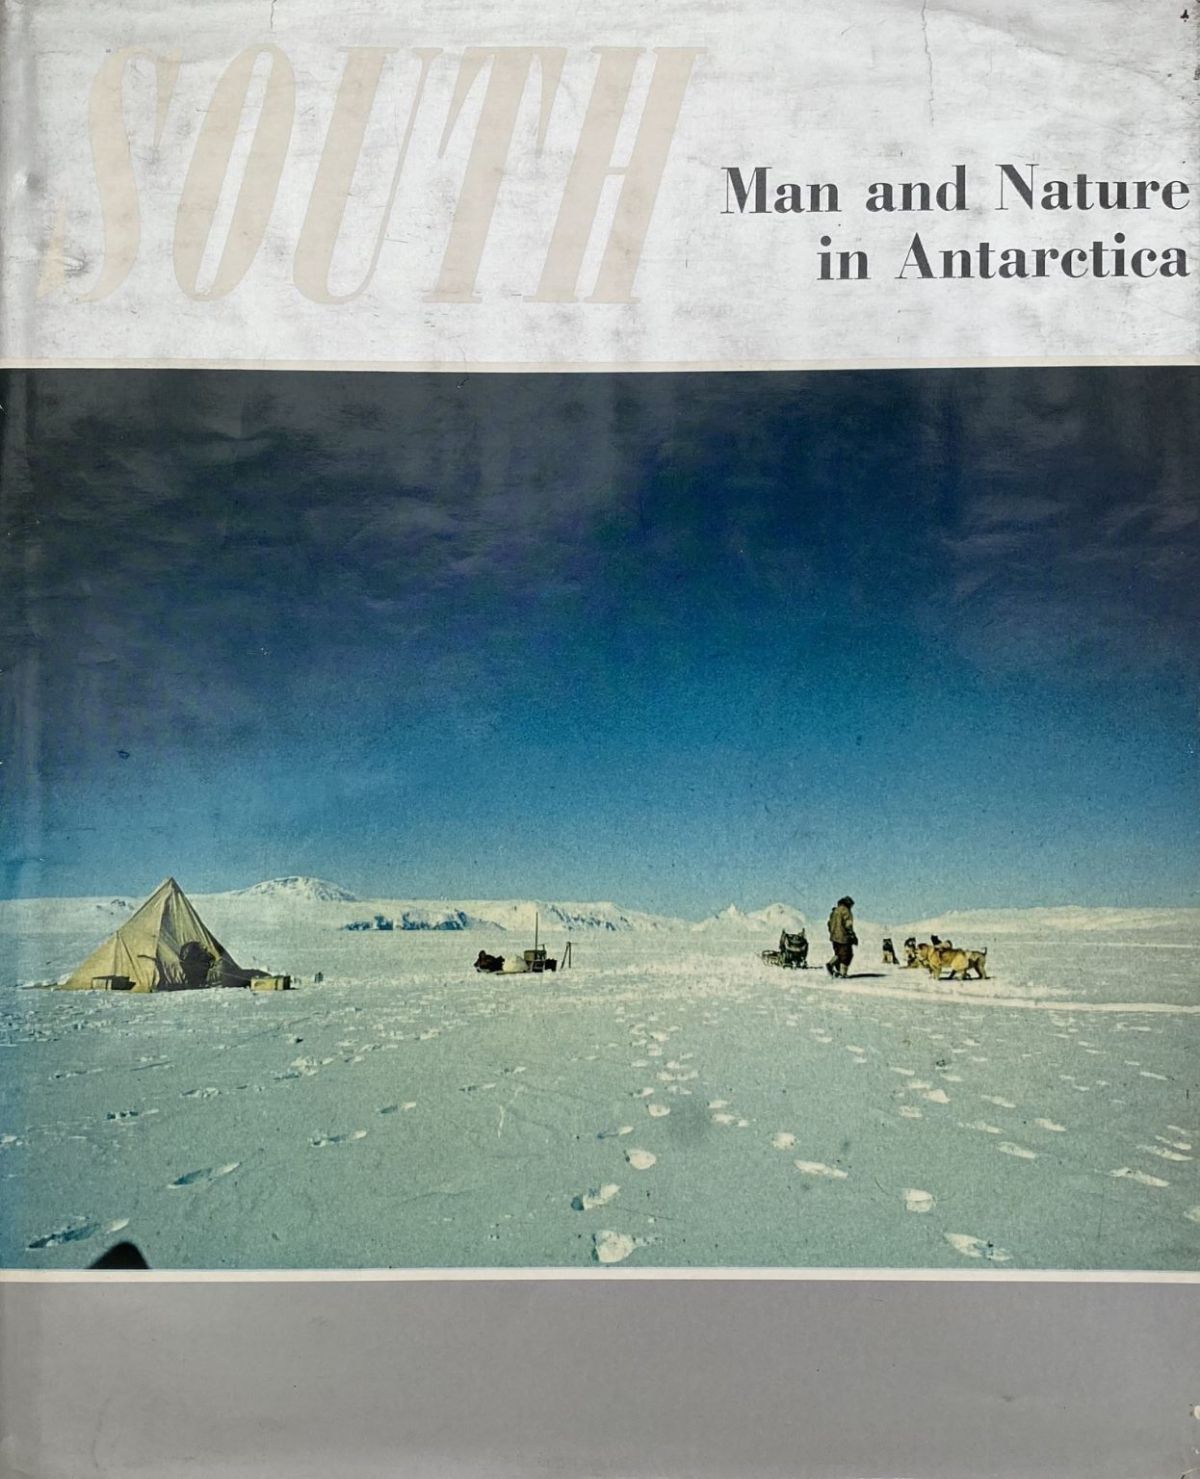 SOUTH: Man and Nature in Antarctica